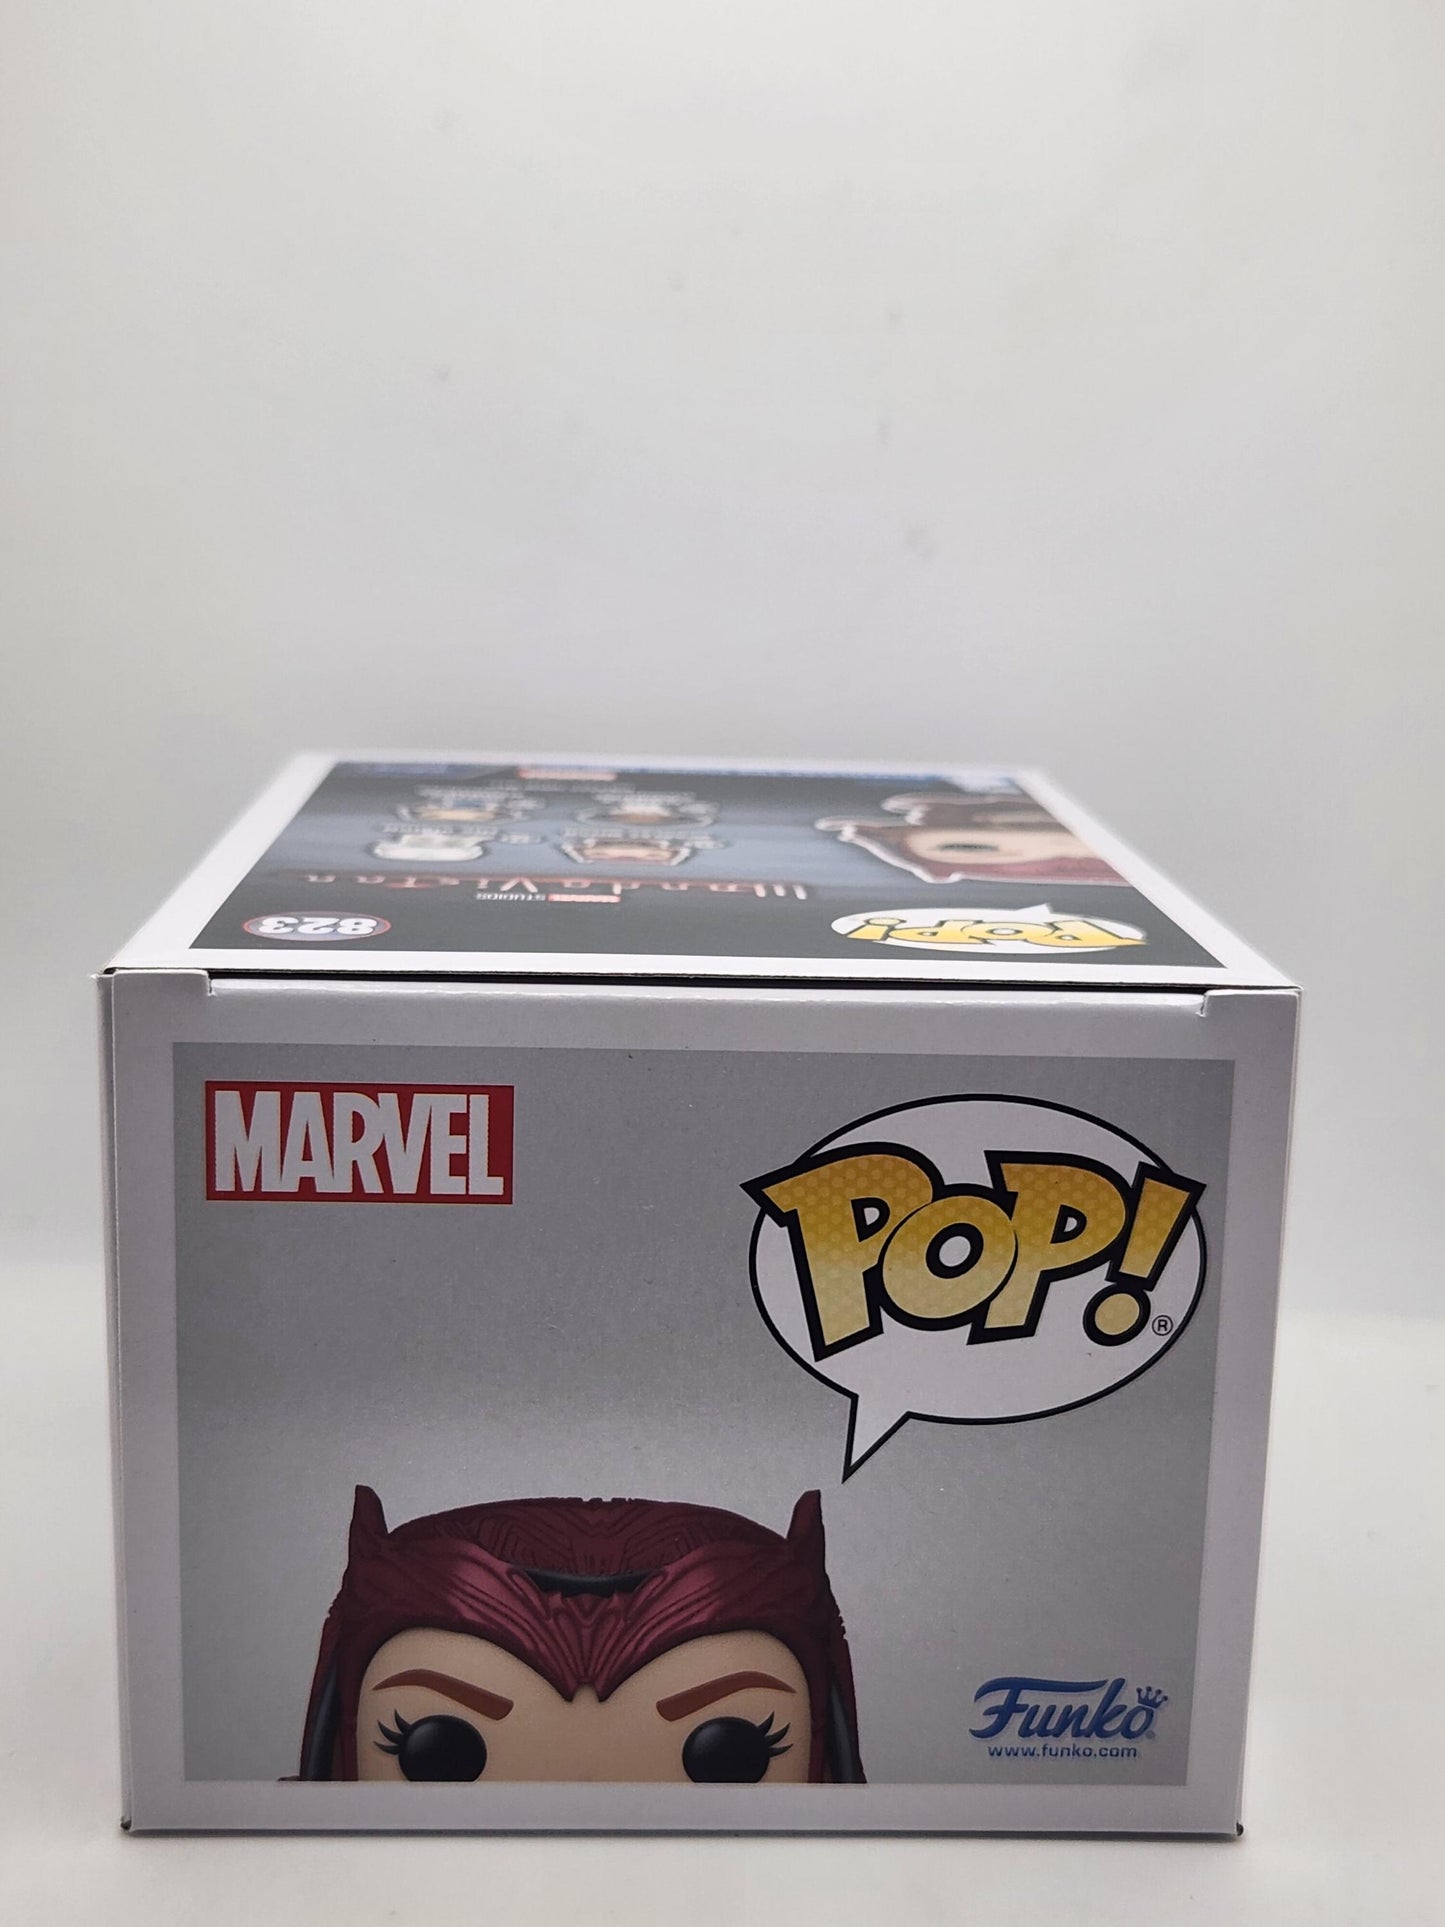 Scarlet Witch (Red|Translucent Glitter) - #823 - Condition 9/10